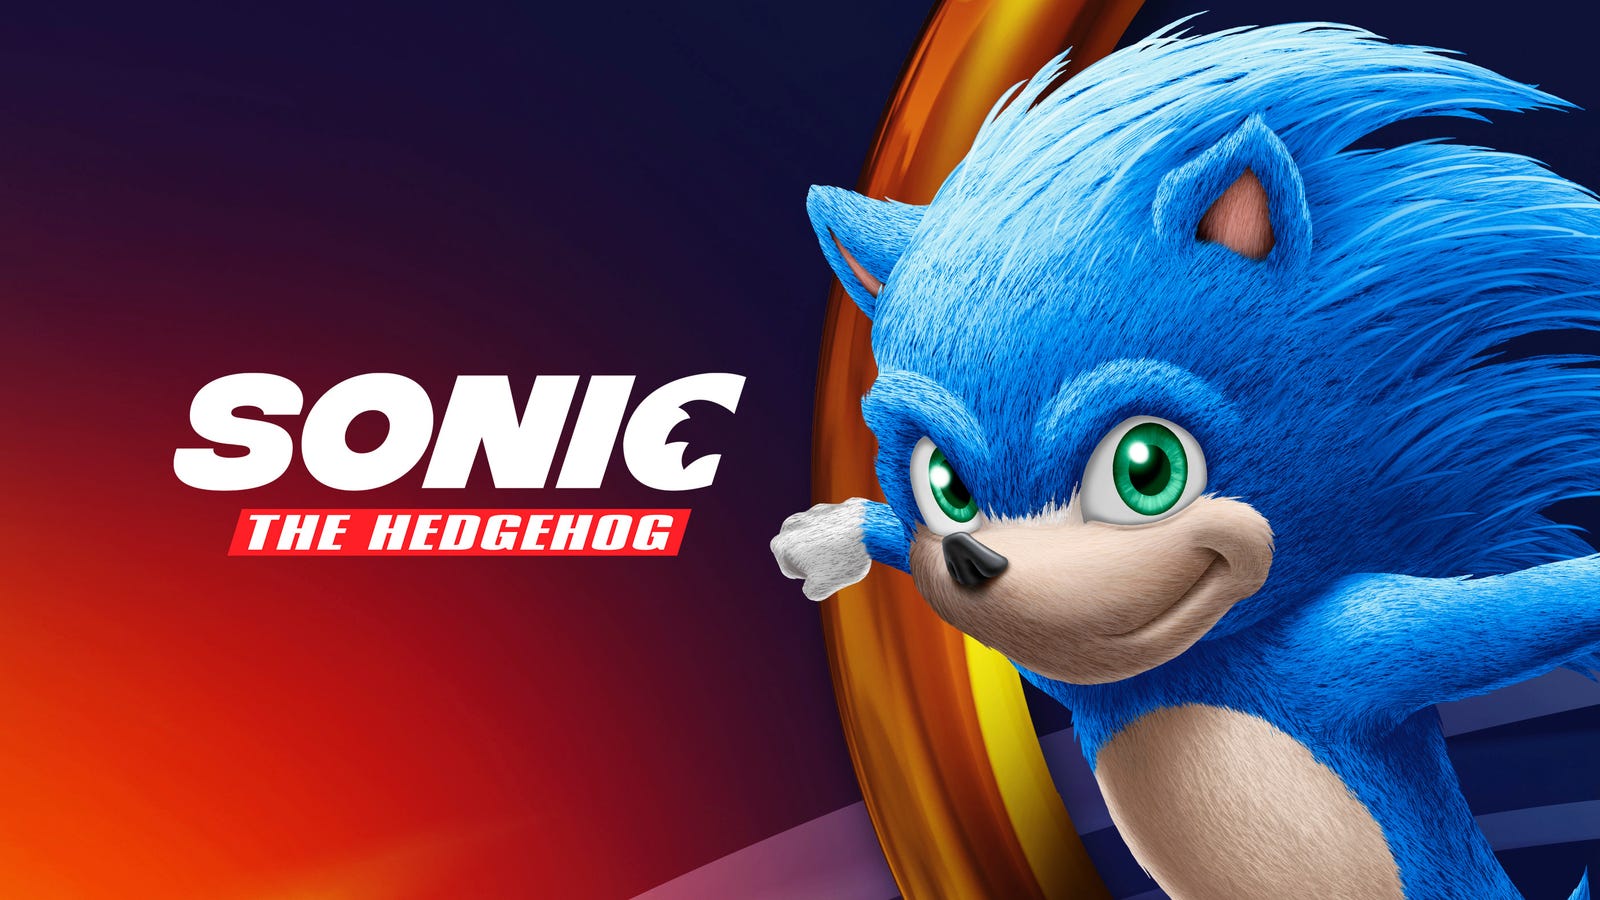 This Is Probably The Movie Version Of Sonic The Hedgehog